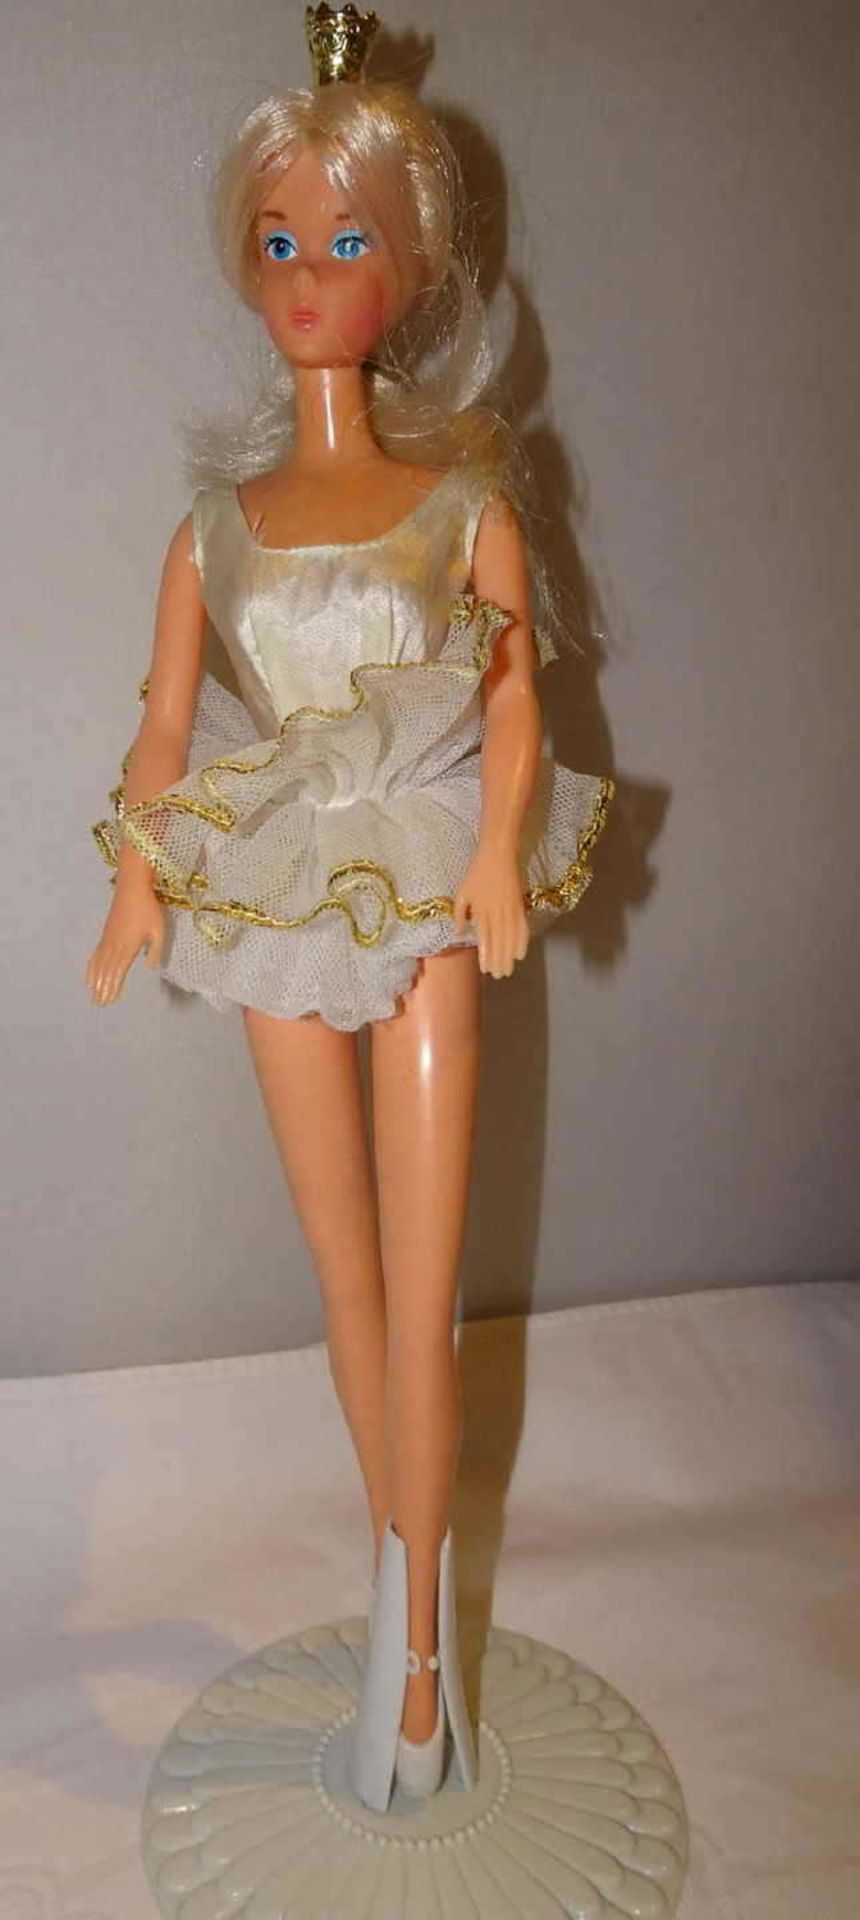 Barbie doll, Mattel 1975 Taiwan, ballerina with crown, on a doll stand, about 30cm high.